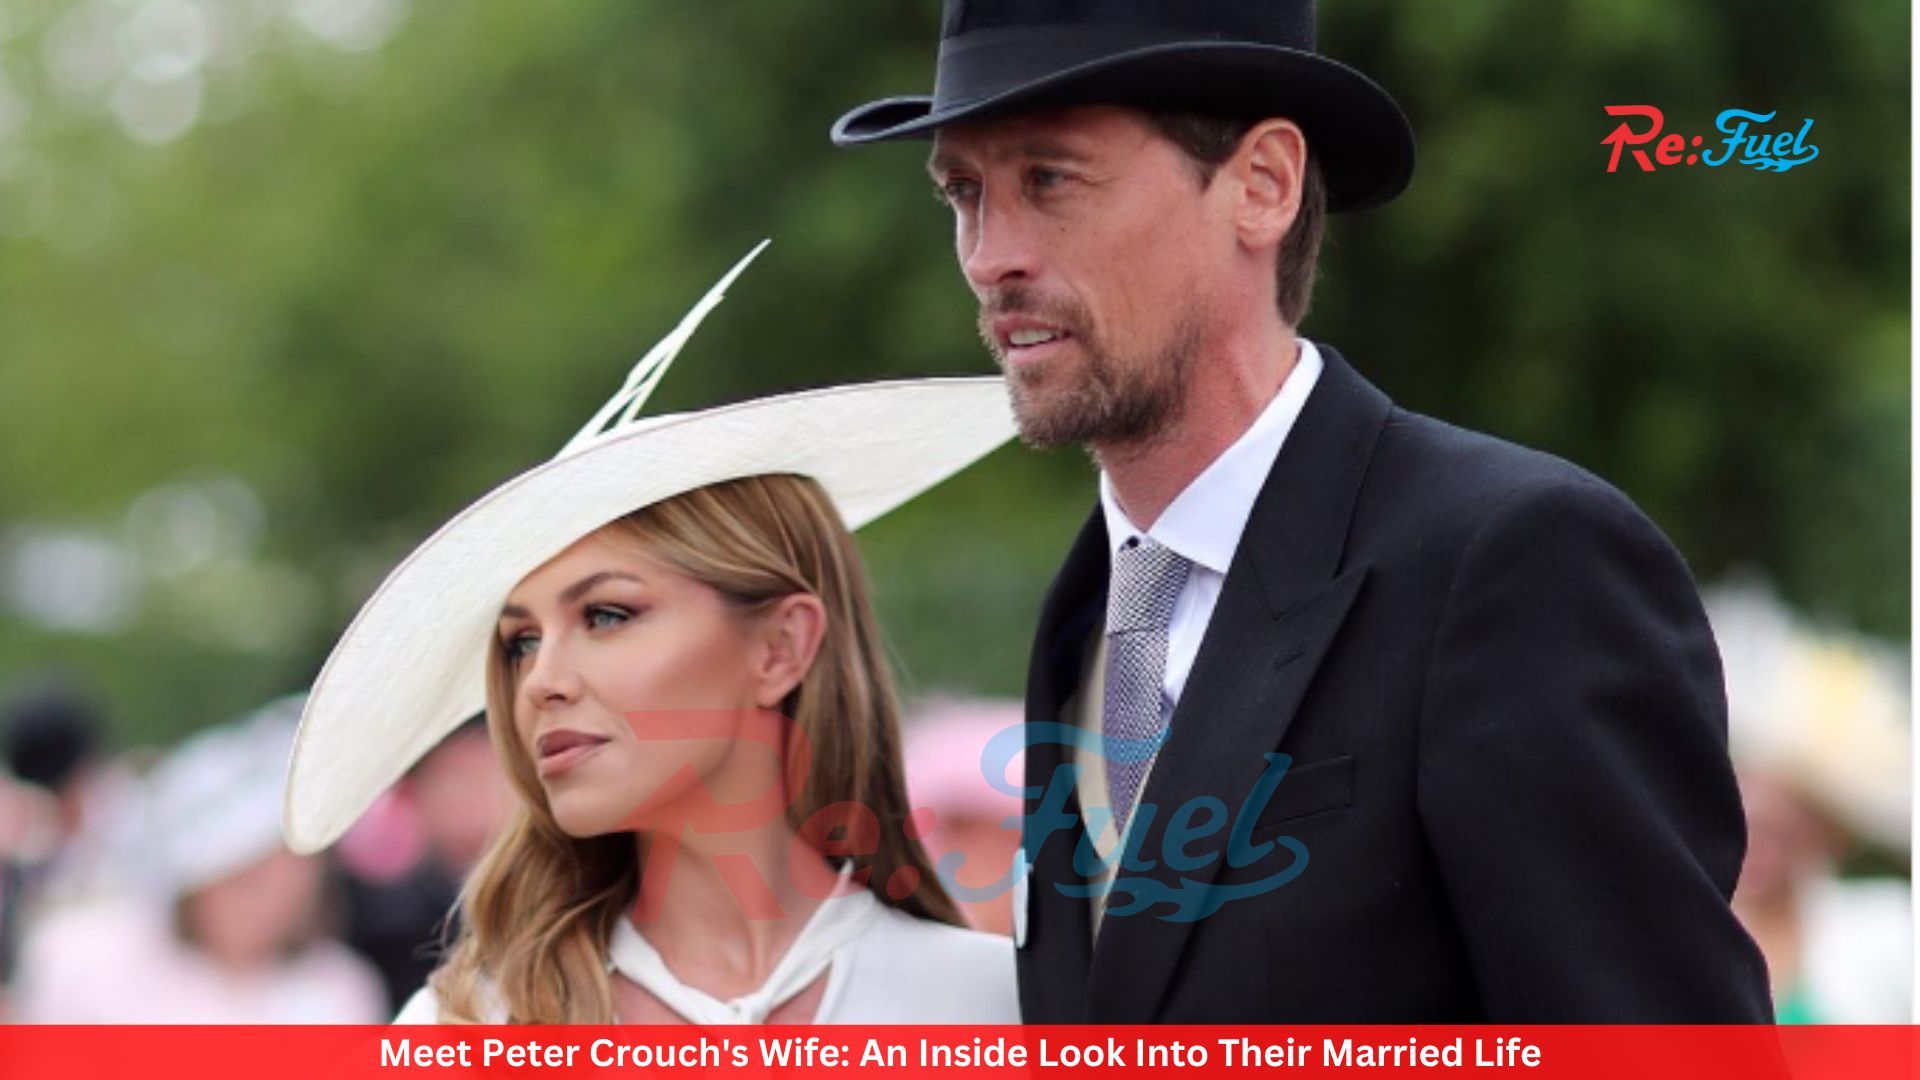 Meet Peter Crouch's Wife: An Inside Look Into Their Married Life